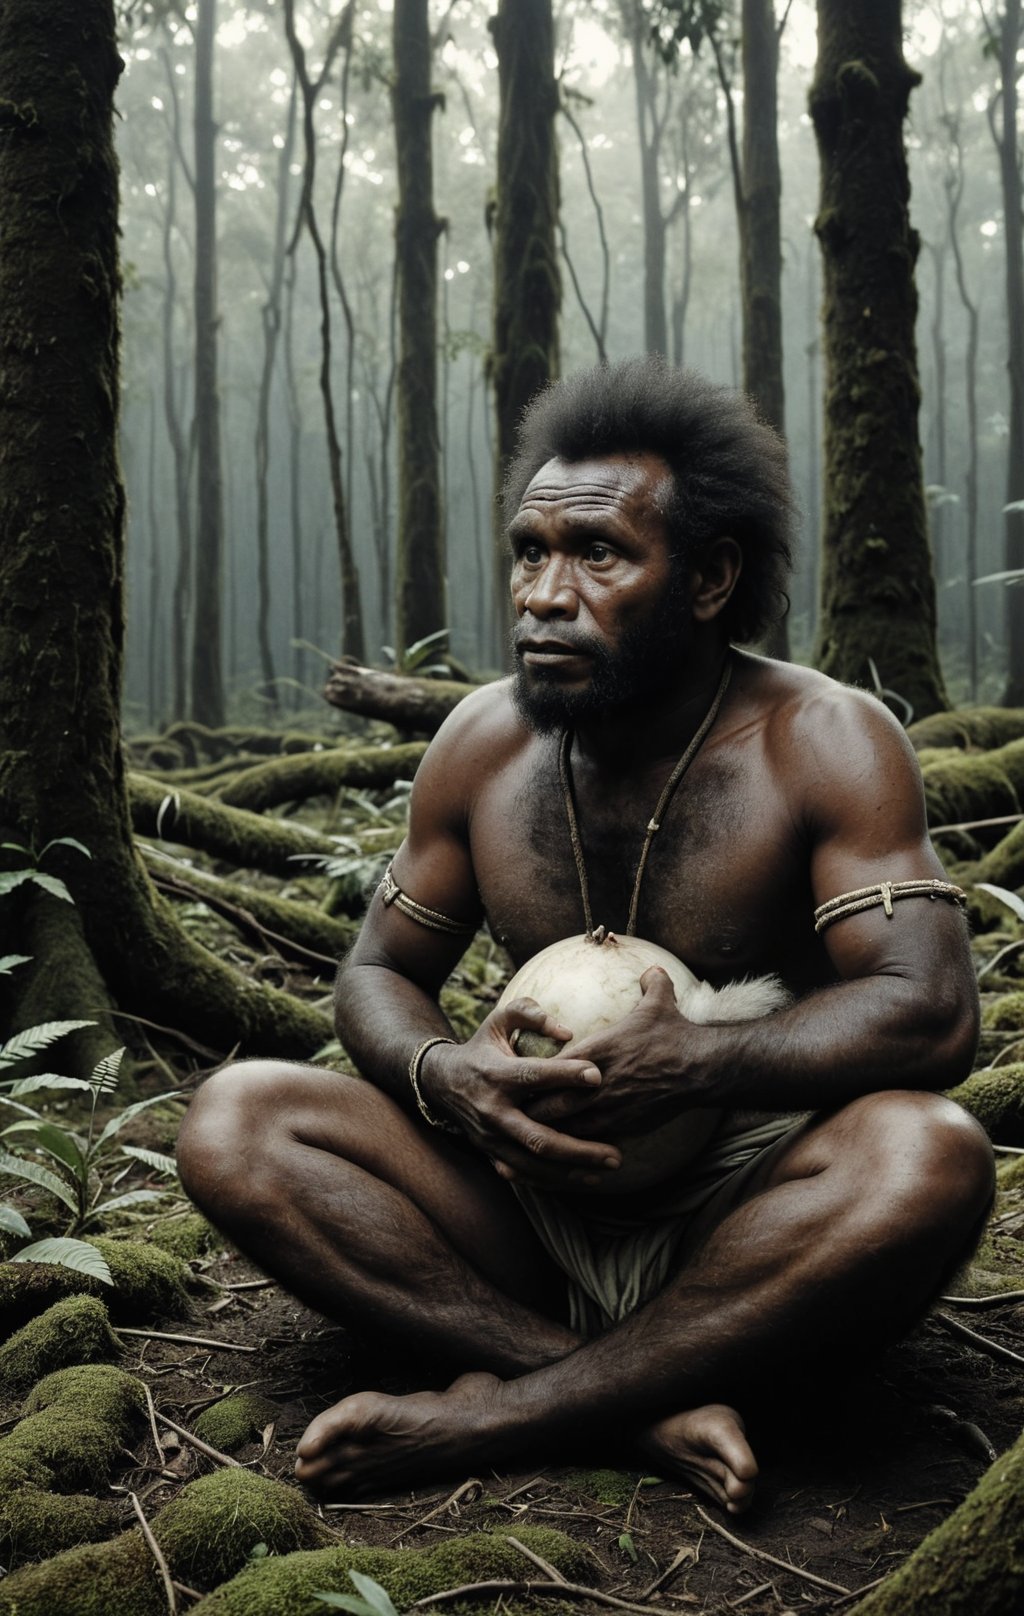 + Papuan, Ivory, in fetal pose position, in Sanctuary, point of view shooting, nesting, majestic, filmed by Don McCullin FOV 90 degrees, Light, Steelpunk, Dark forest candlelight, movie grain, film camera, field depth 270 mm